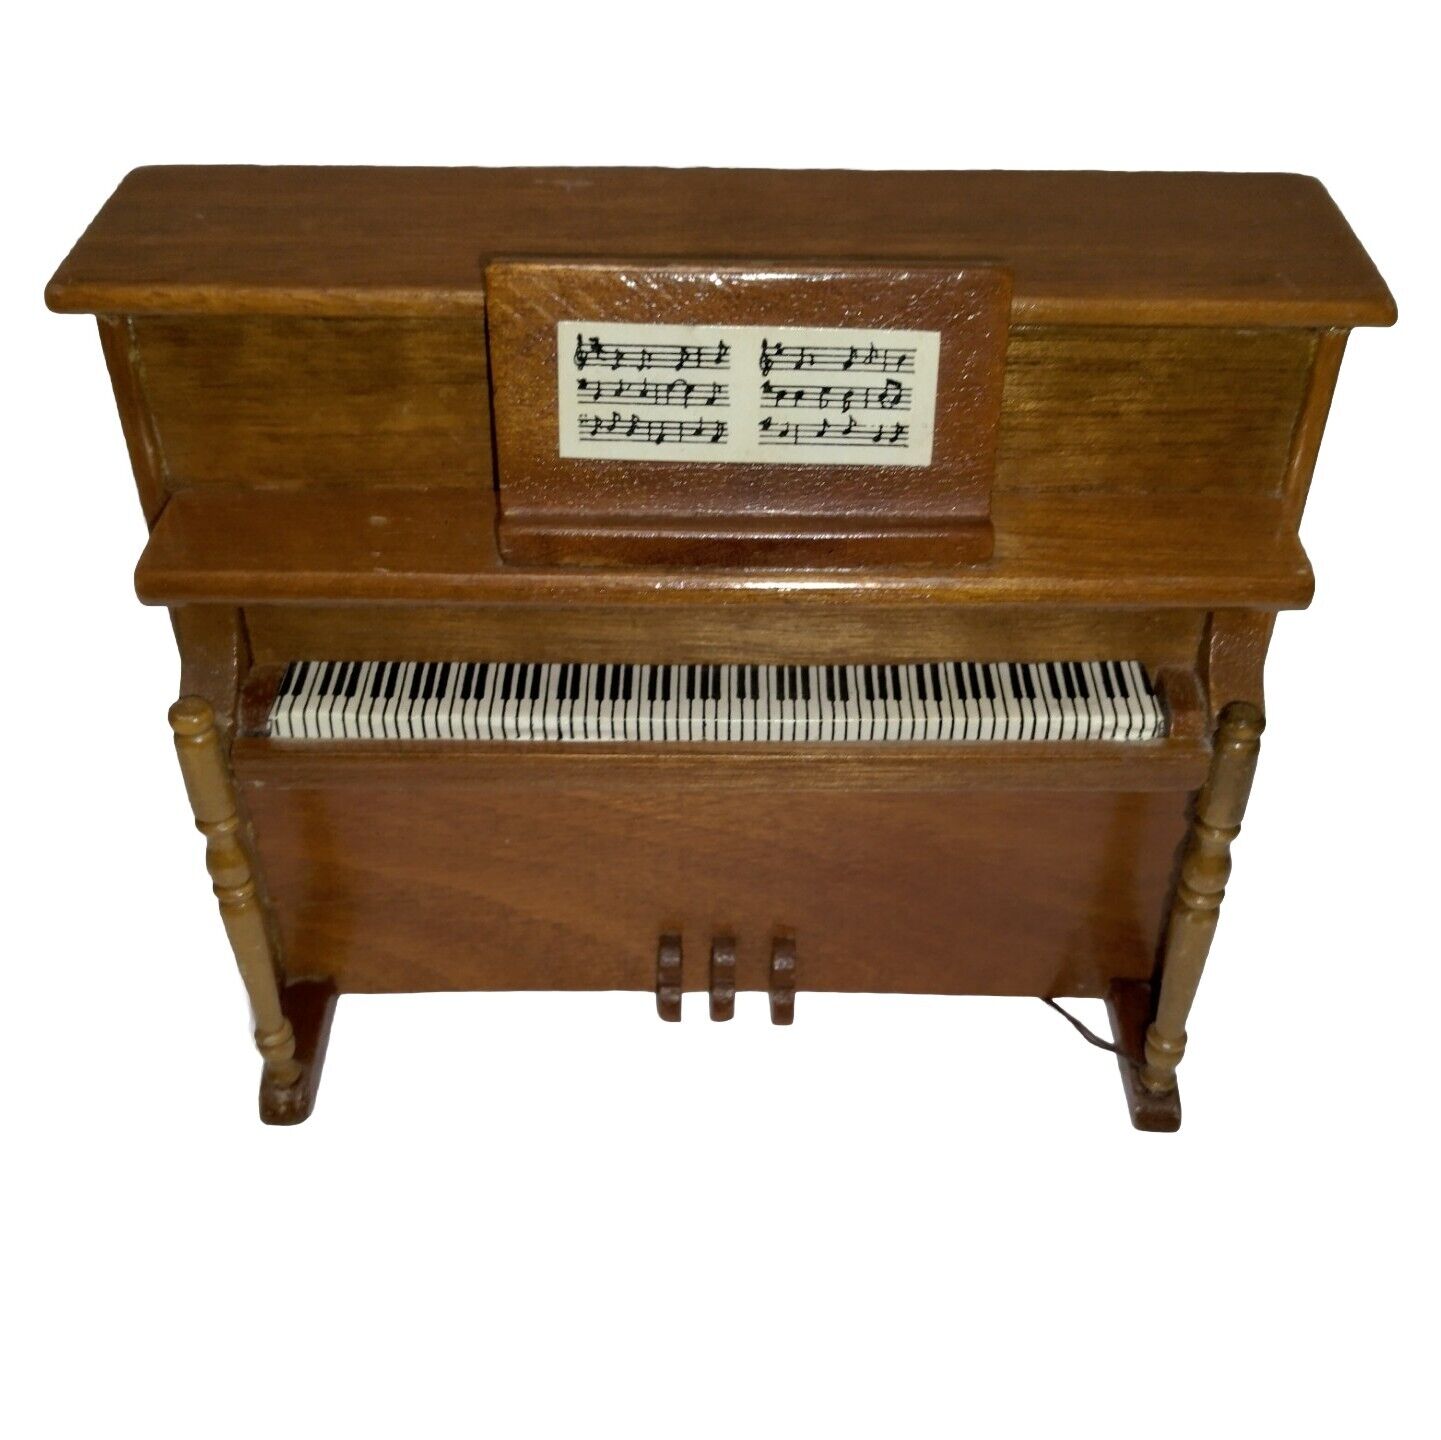 Vintage 1982 Wooden Upright Piano - GG Music Box \